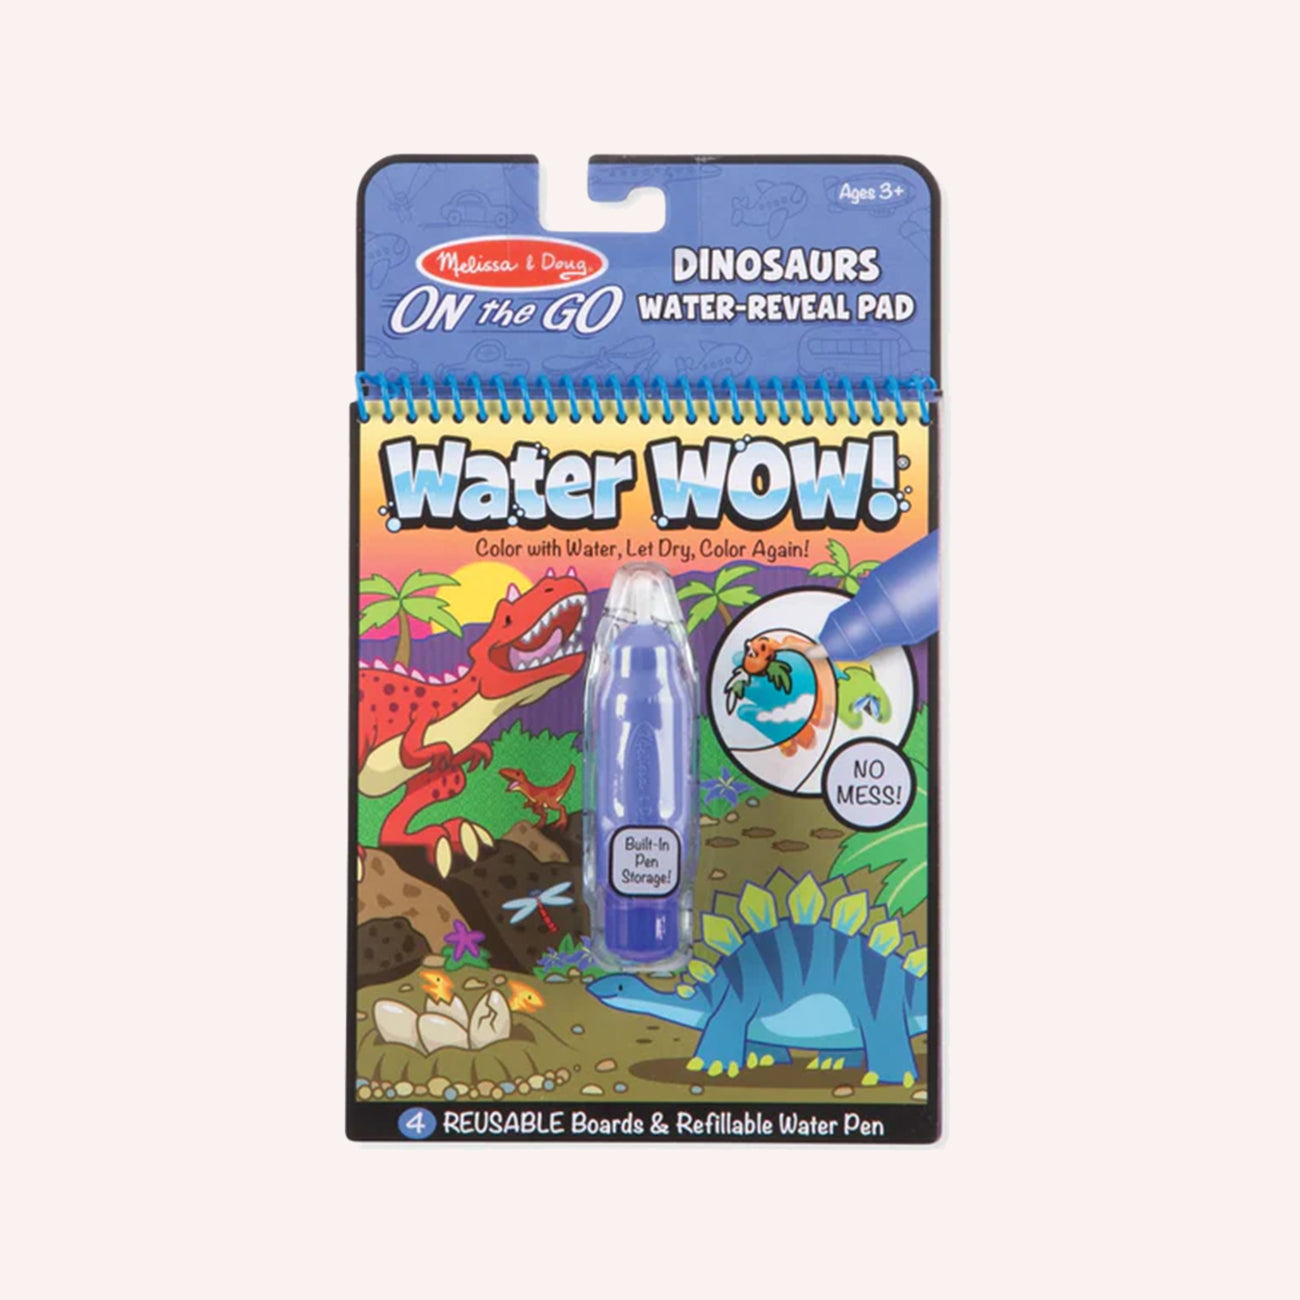 On The Go - Water WOW! - Dinosaurs